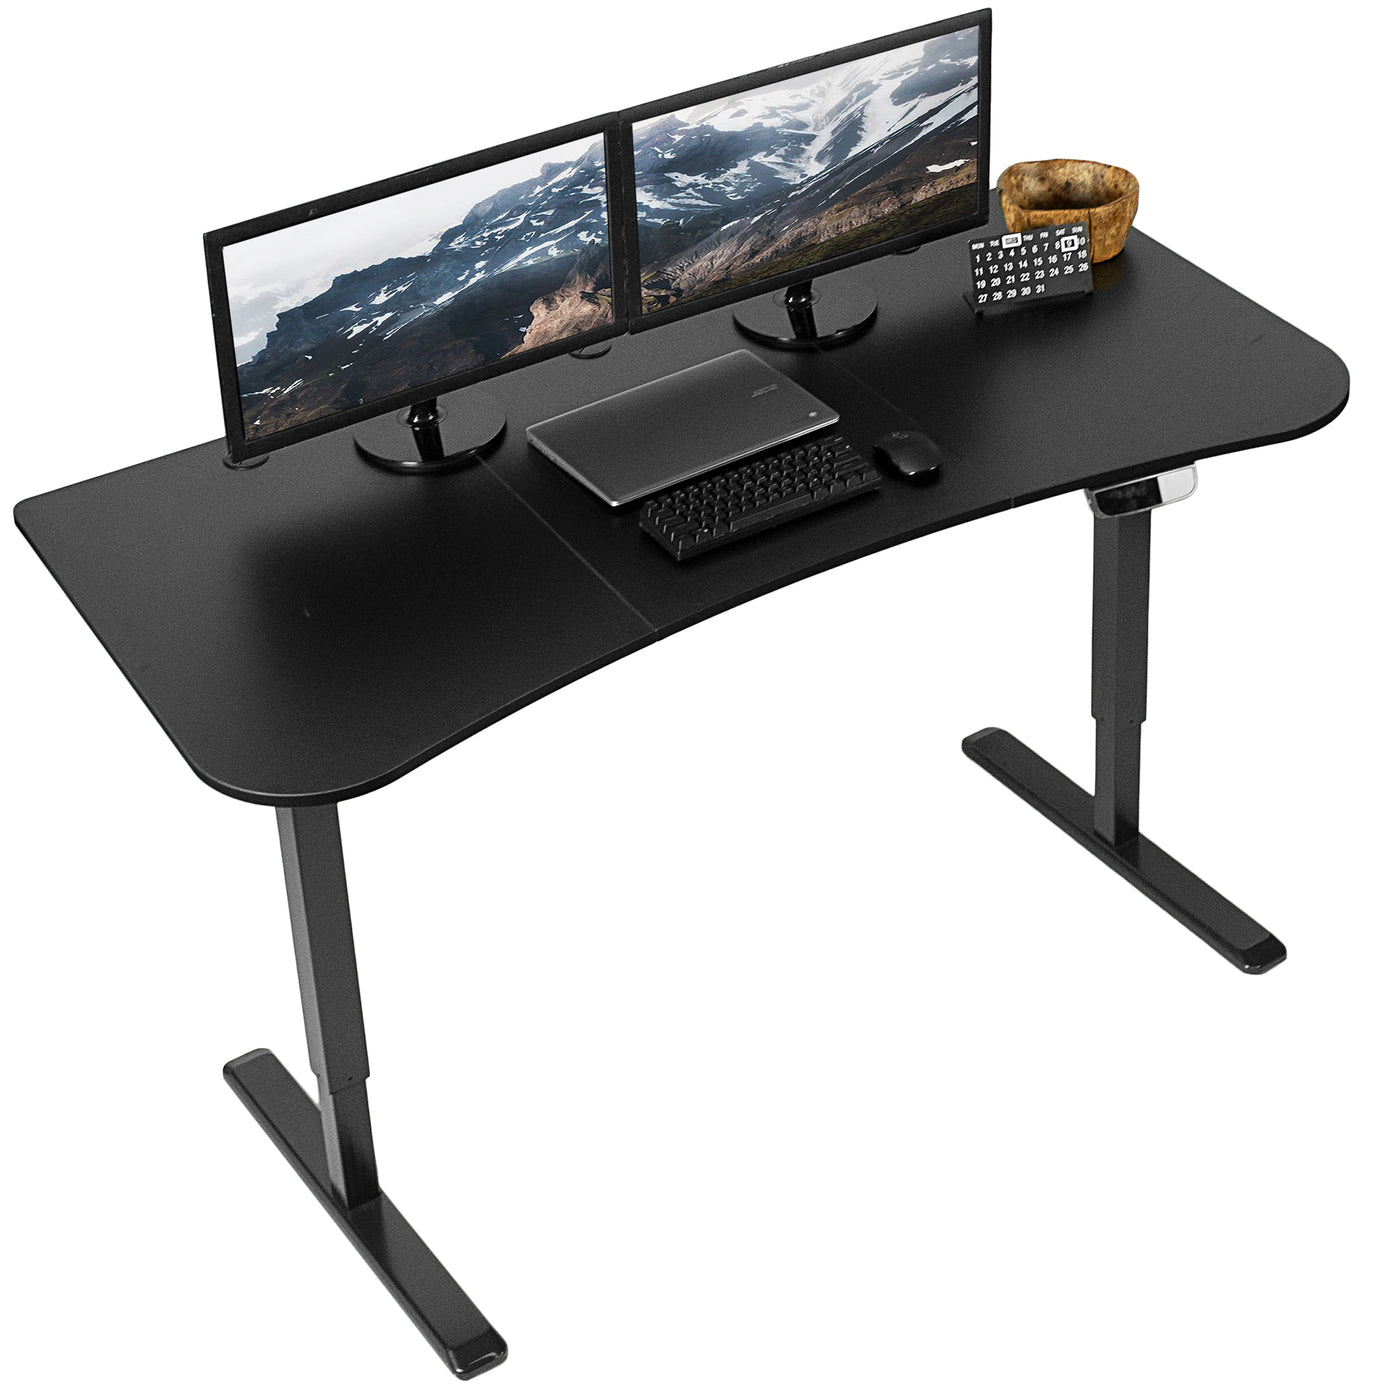 Large spacious sit-to-stand office desk with touchscreen controller panel.